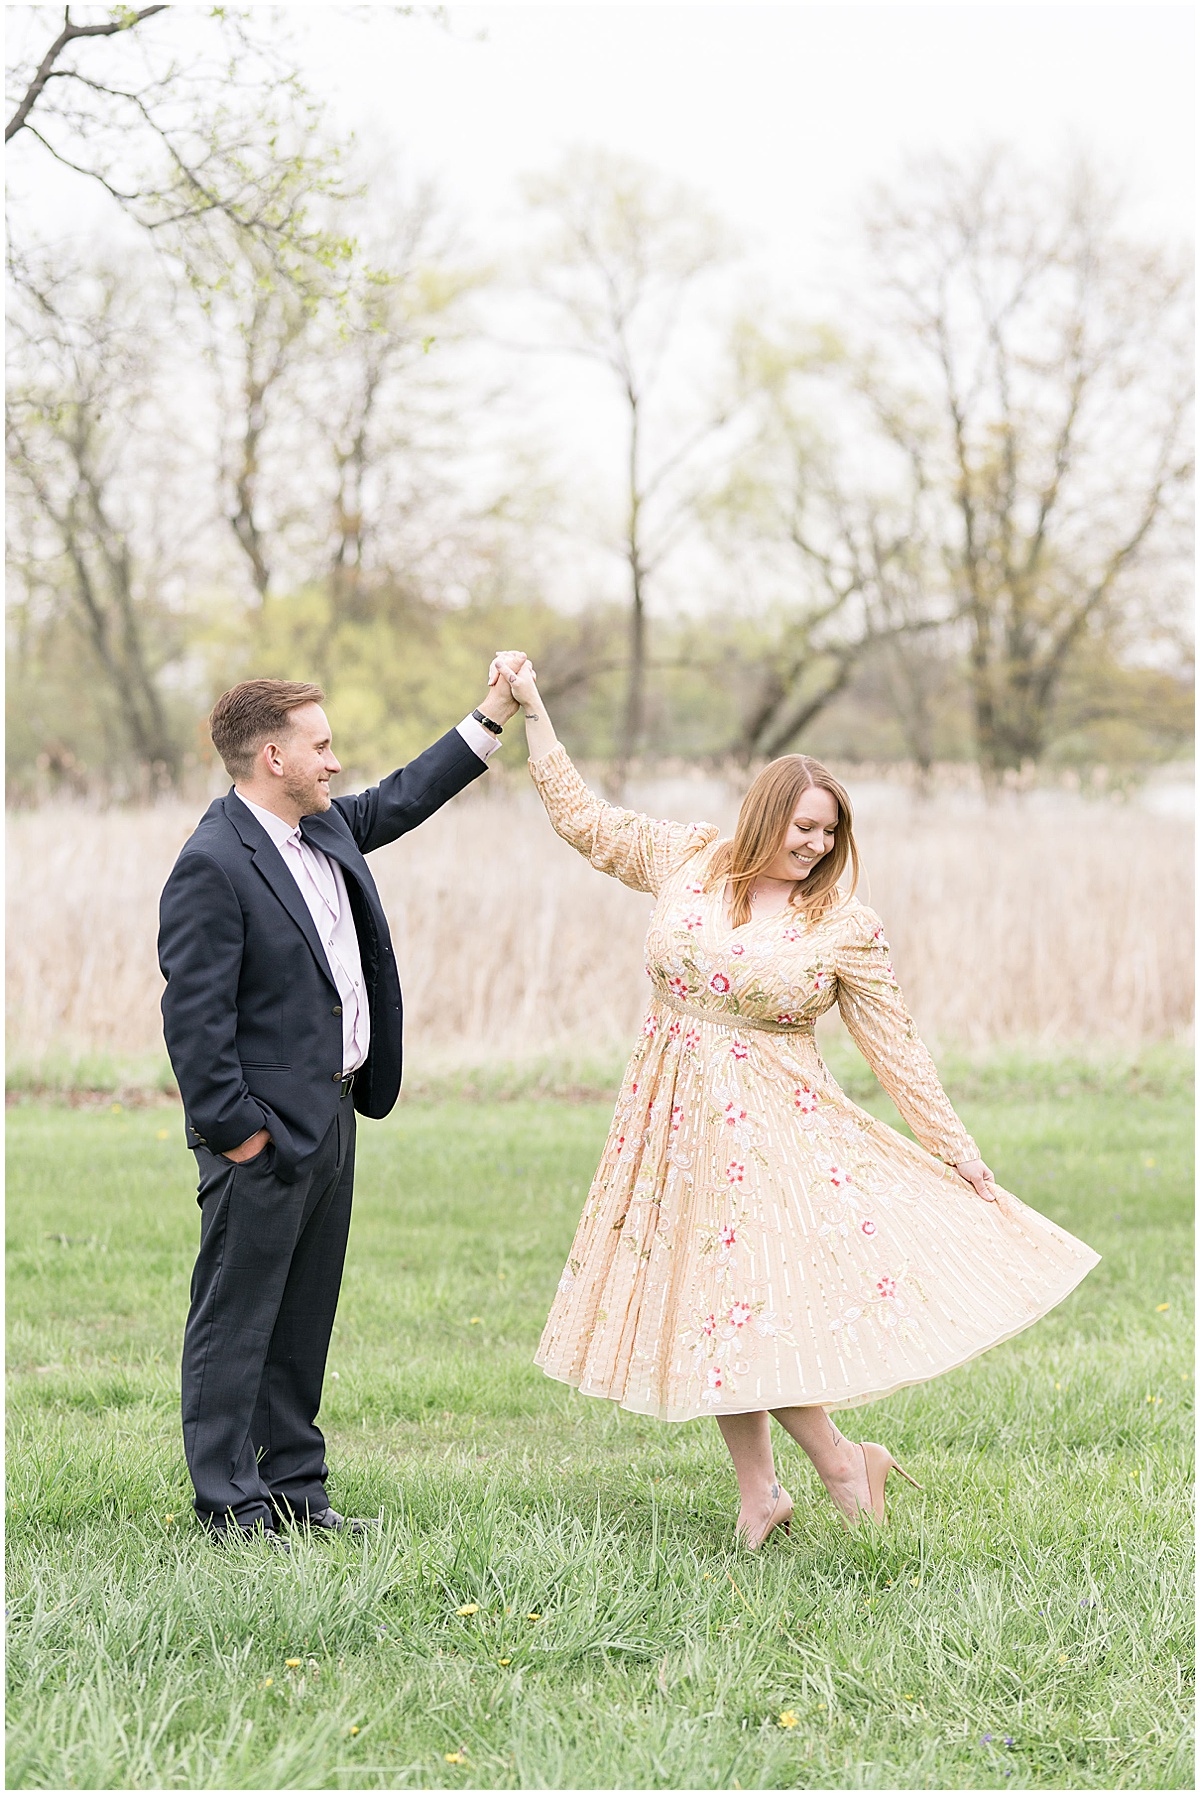 Couple dancing in grass field during engagement session by Indianapolis wedding photographer Victoria Rayburn Photography